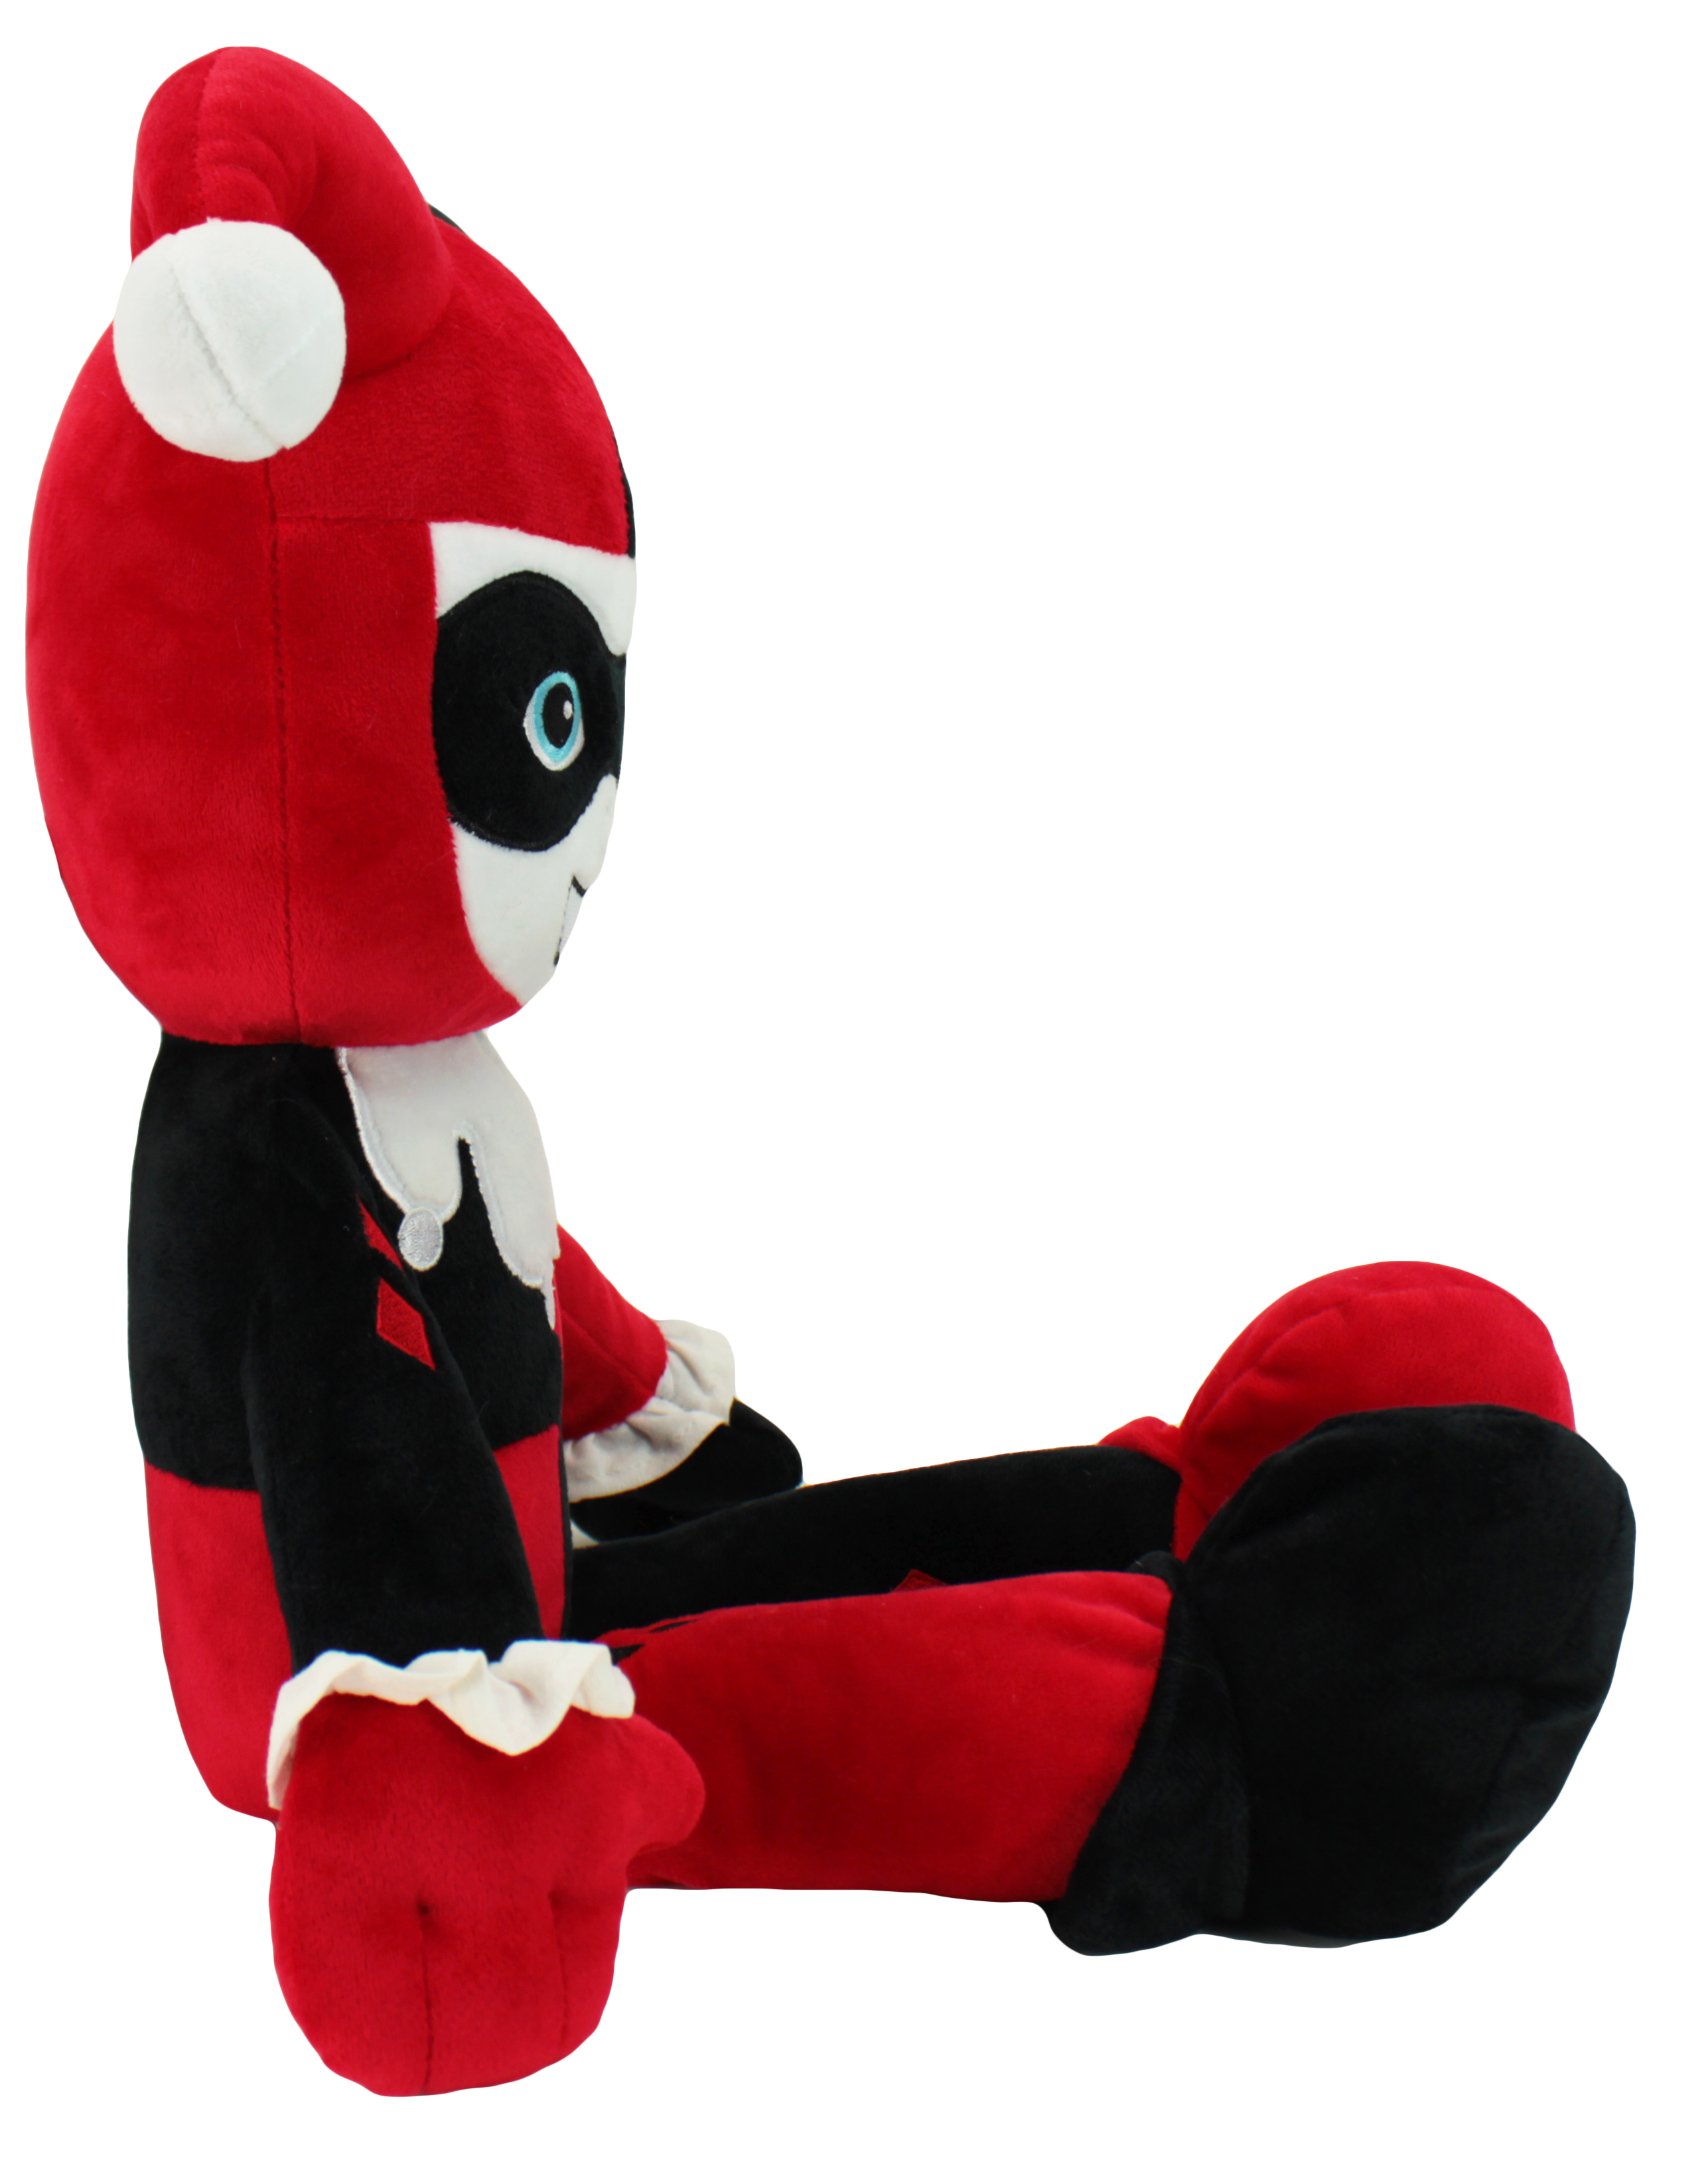 Justice League Harley Quinn Plush Character - image 3 of 4